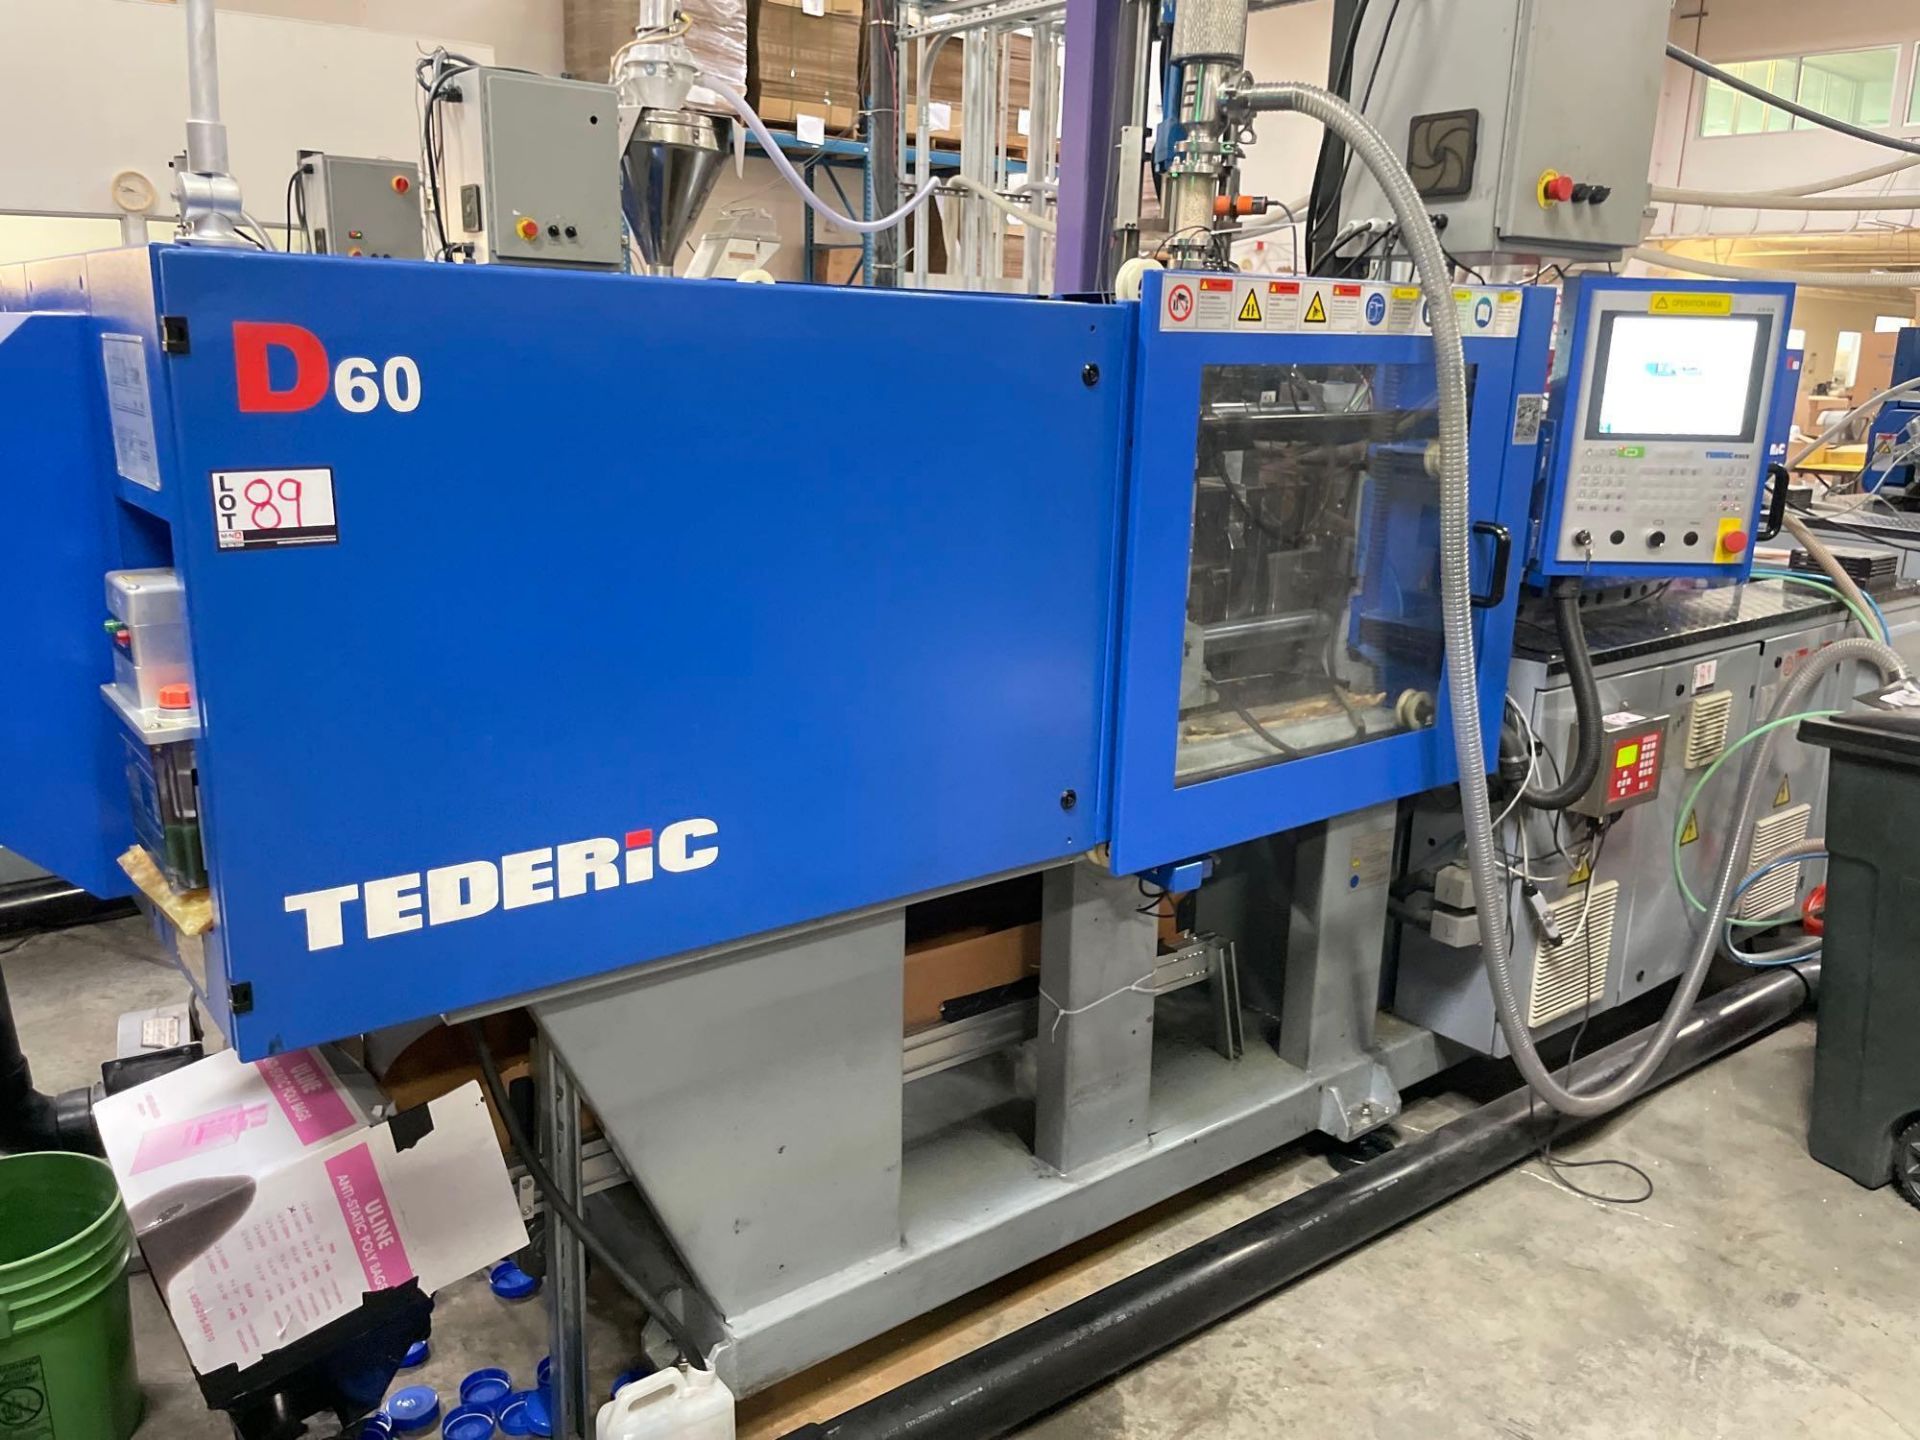 66 Ton Tederic D60 Plastic Injection Molder, Keba 12000 Control, s/n T3008-0200, New 2018 - Image 9 of 17